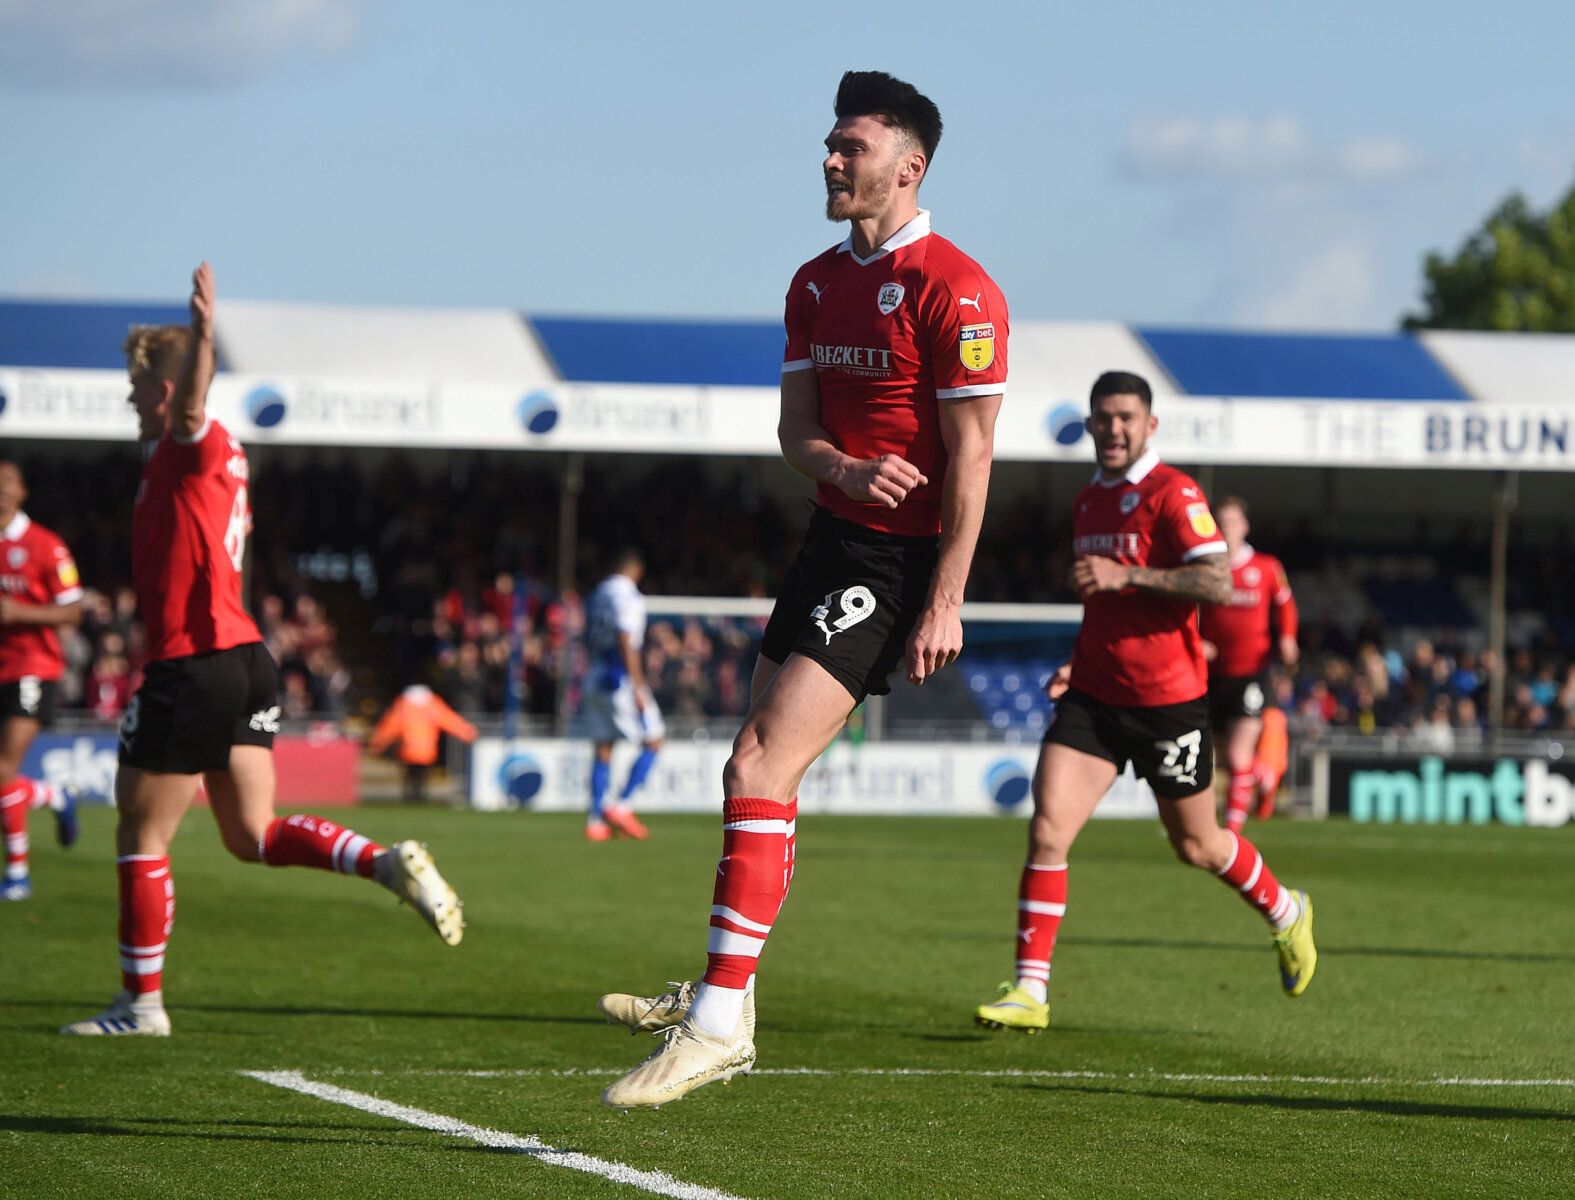 Soccer Football - League One - Bristol Rovers v Barnsley - Memorial Stadium, Bristol, Britain - May 4, 2019   Barnsley's Kieffer Moore celebrates scoring their first goal    Action Images/Alan Walter    EDITORIAL USE ONLY. No use with unauthorized audio, video, data, fixture lists, club/league logos or 